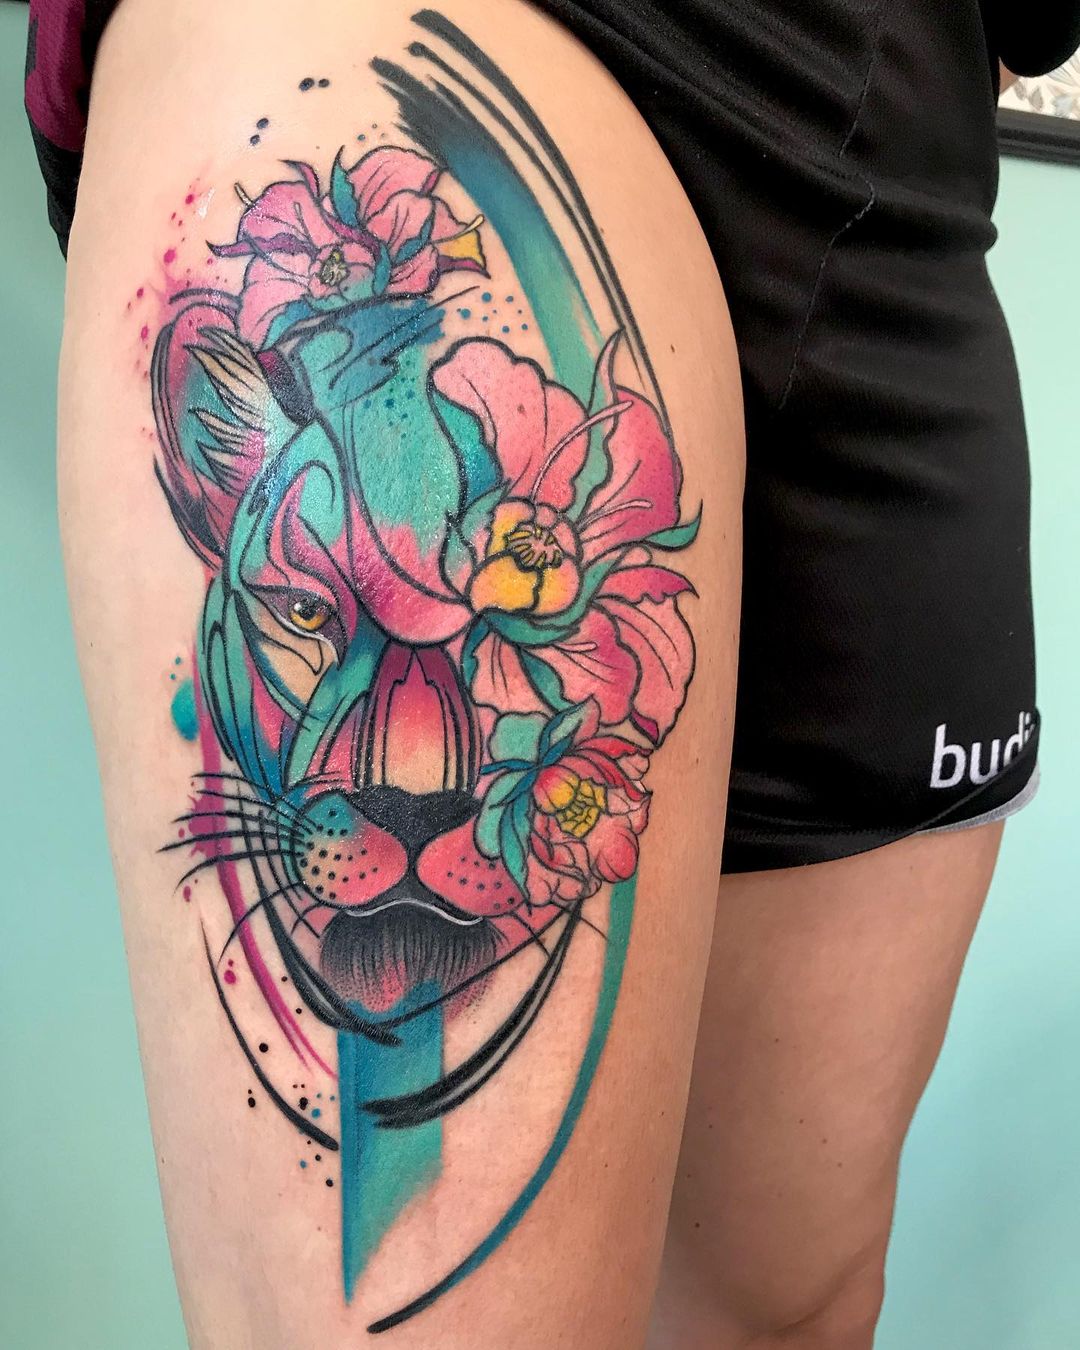 Choose vibrant tones of colors to make your tattoo look alive.